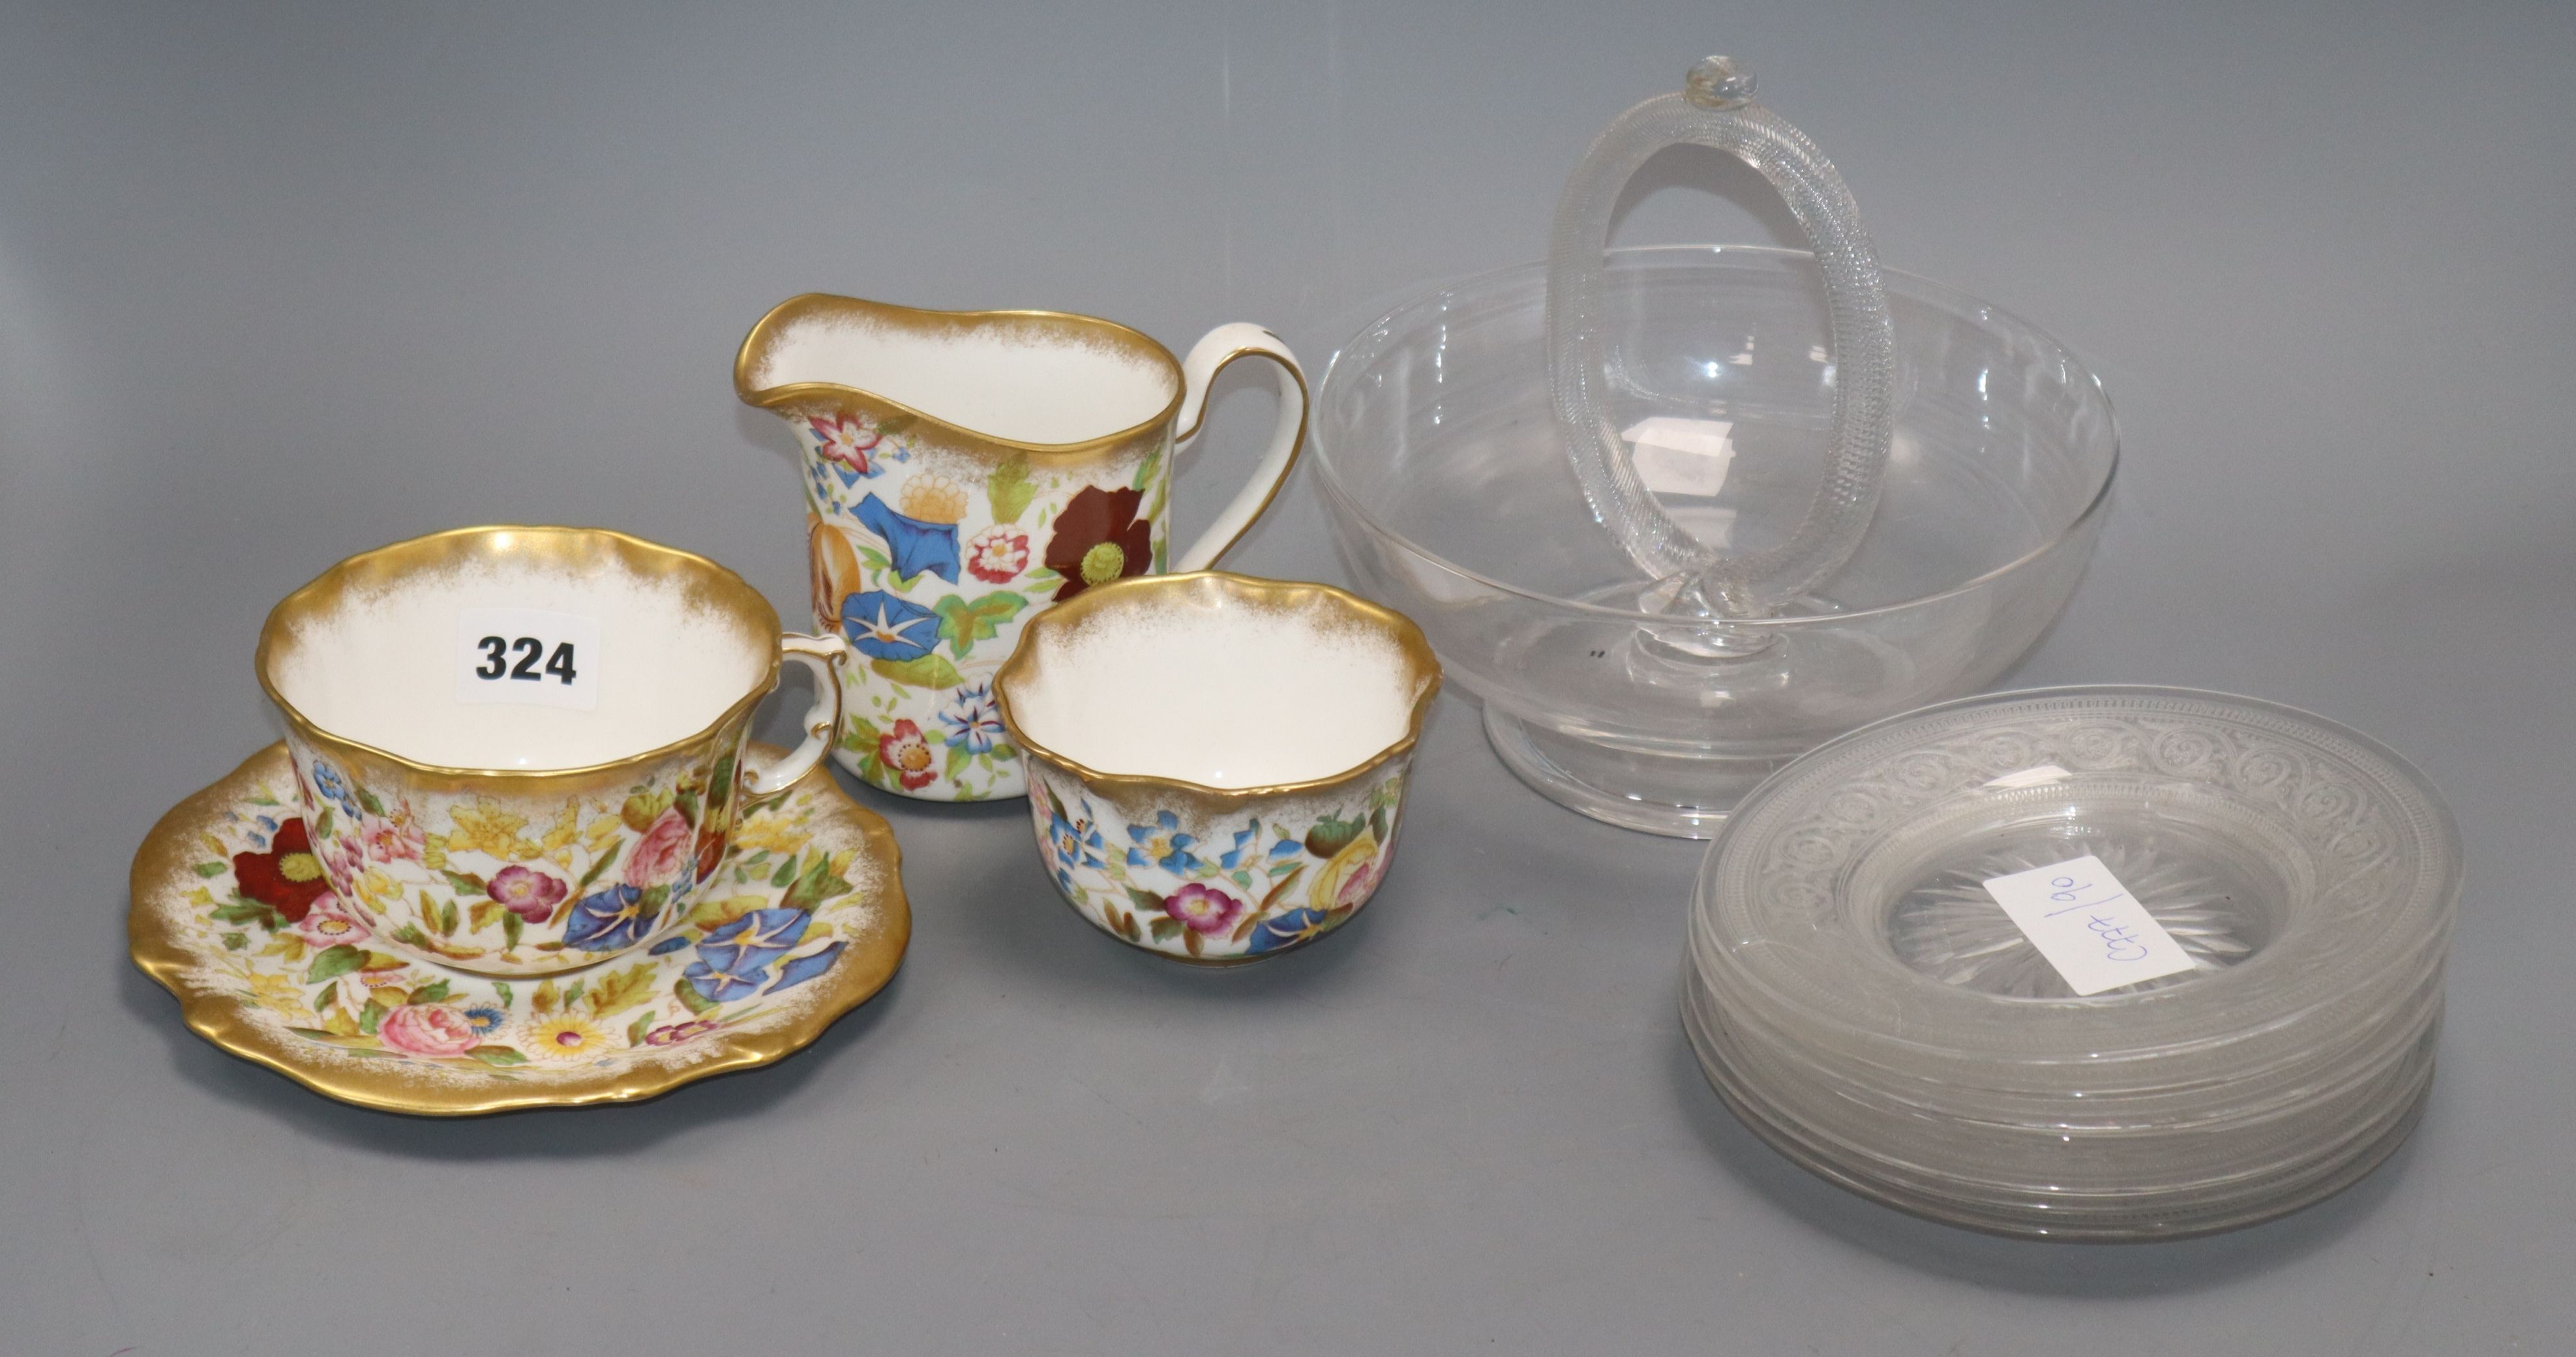 A Victorian glass dish, six glass side dishes and a Hammersley bone china breakfast set